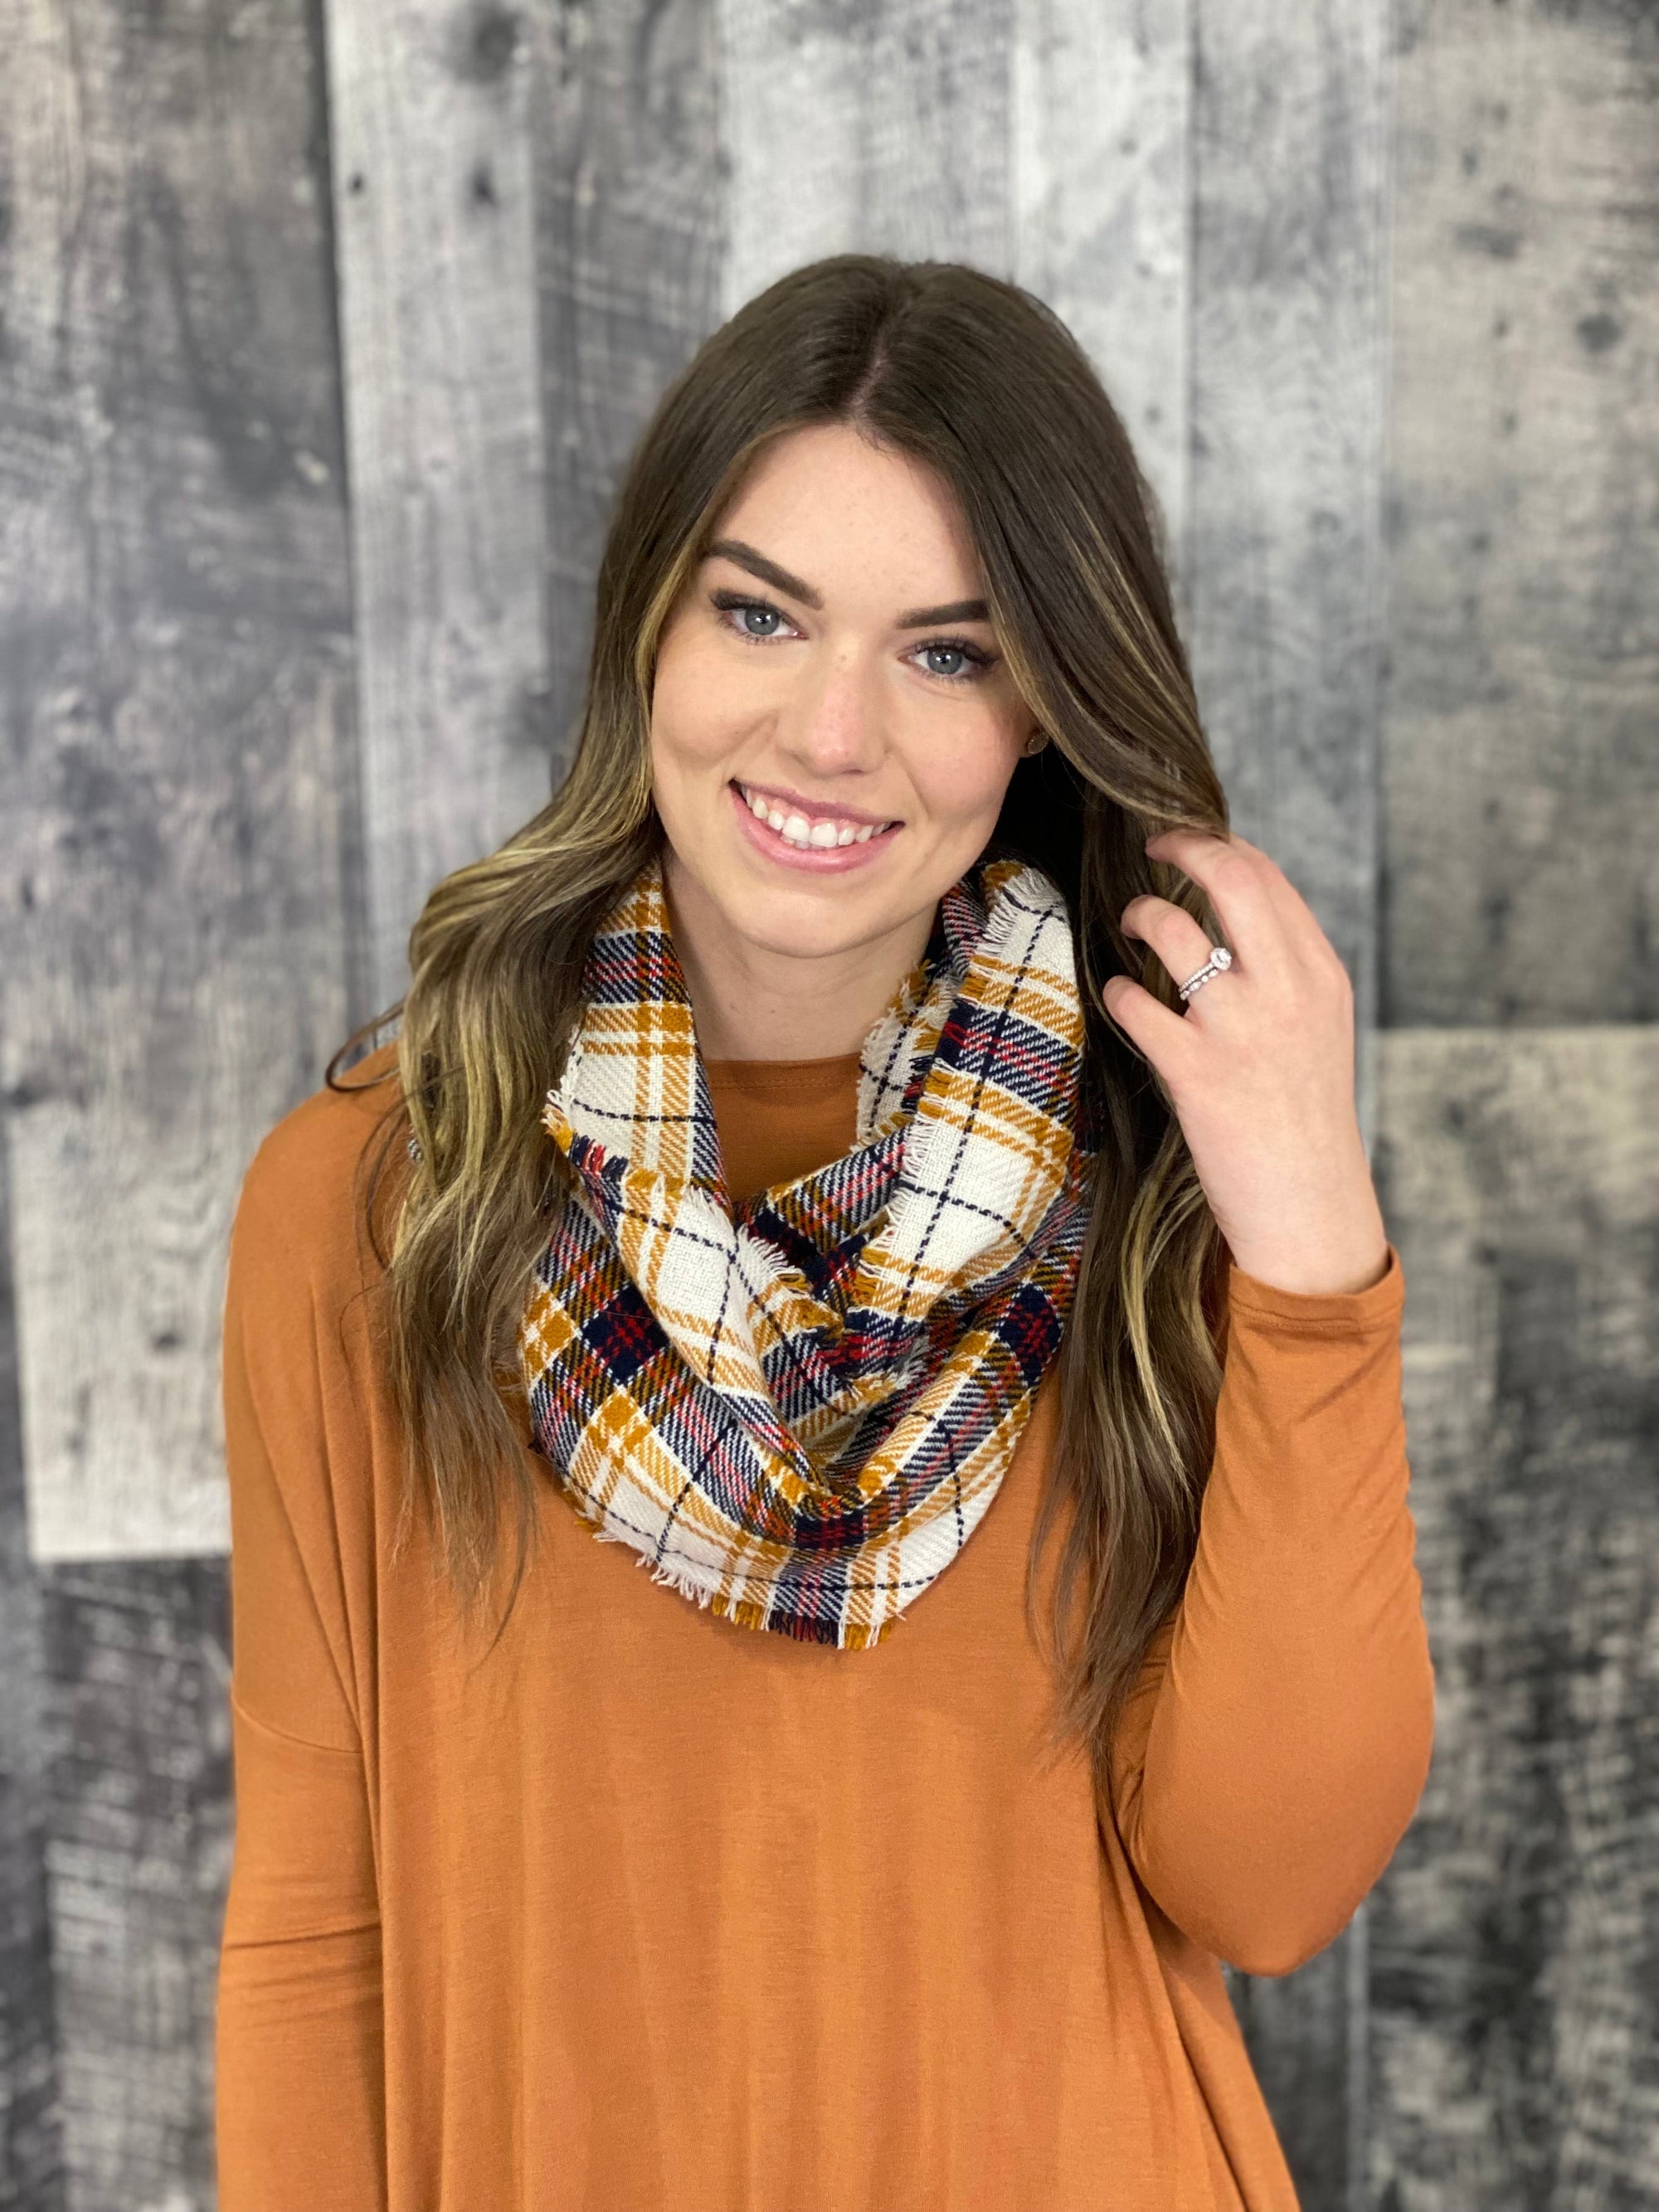 Infinity Scarf - Taupe/Mustard/Navy